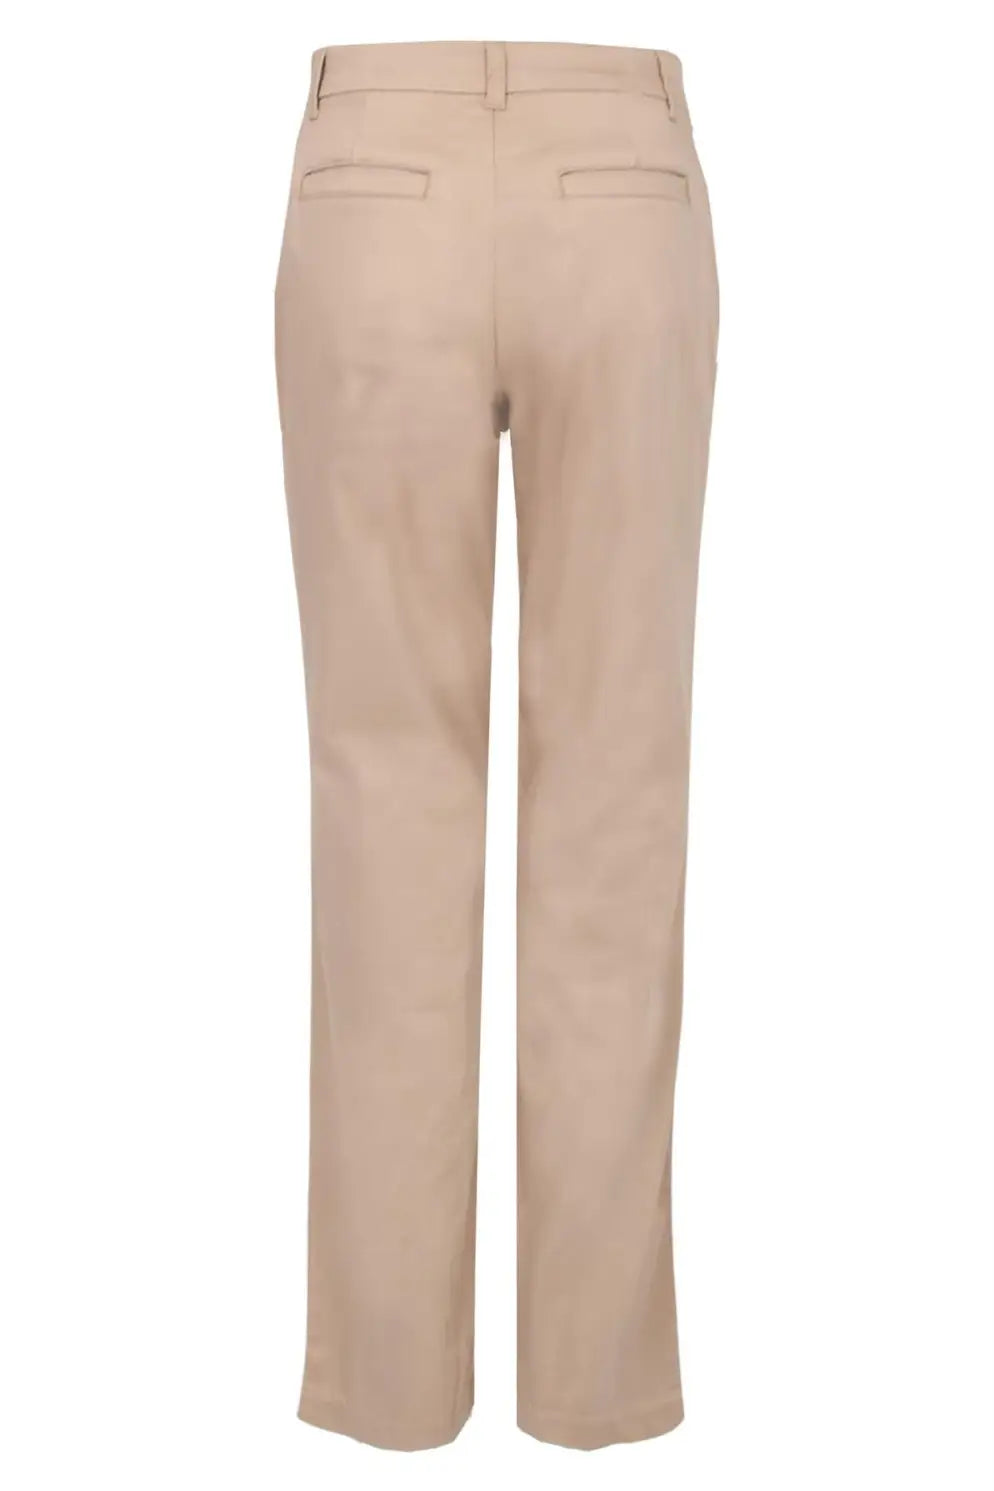 Lee Comfort Stretch Chino Trousers